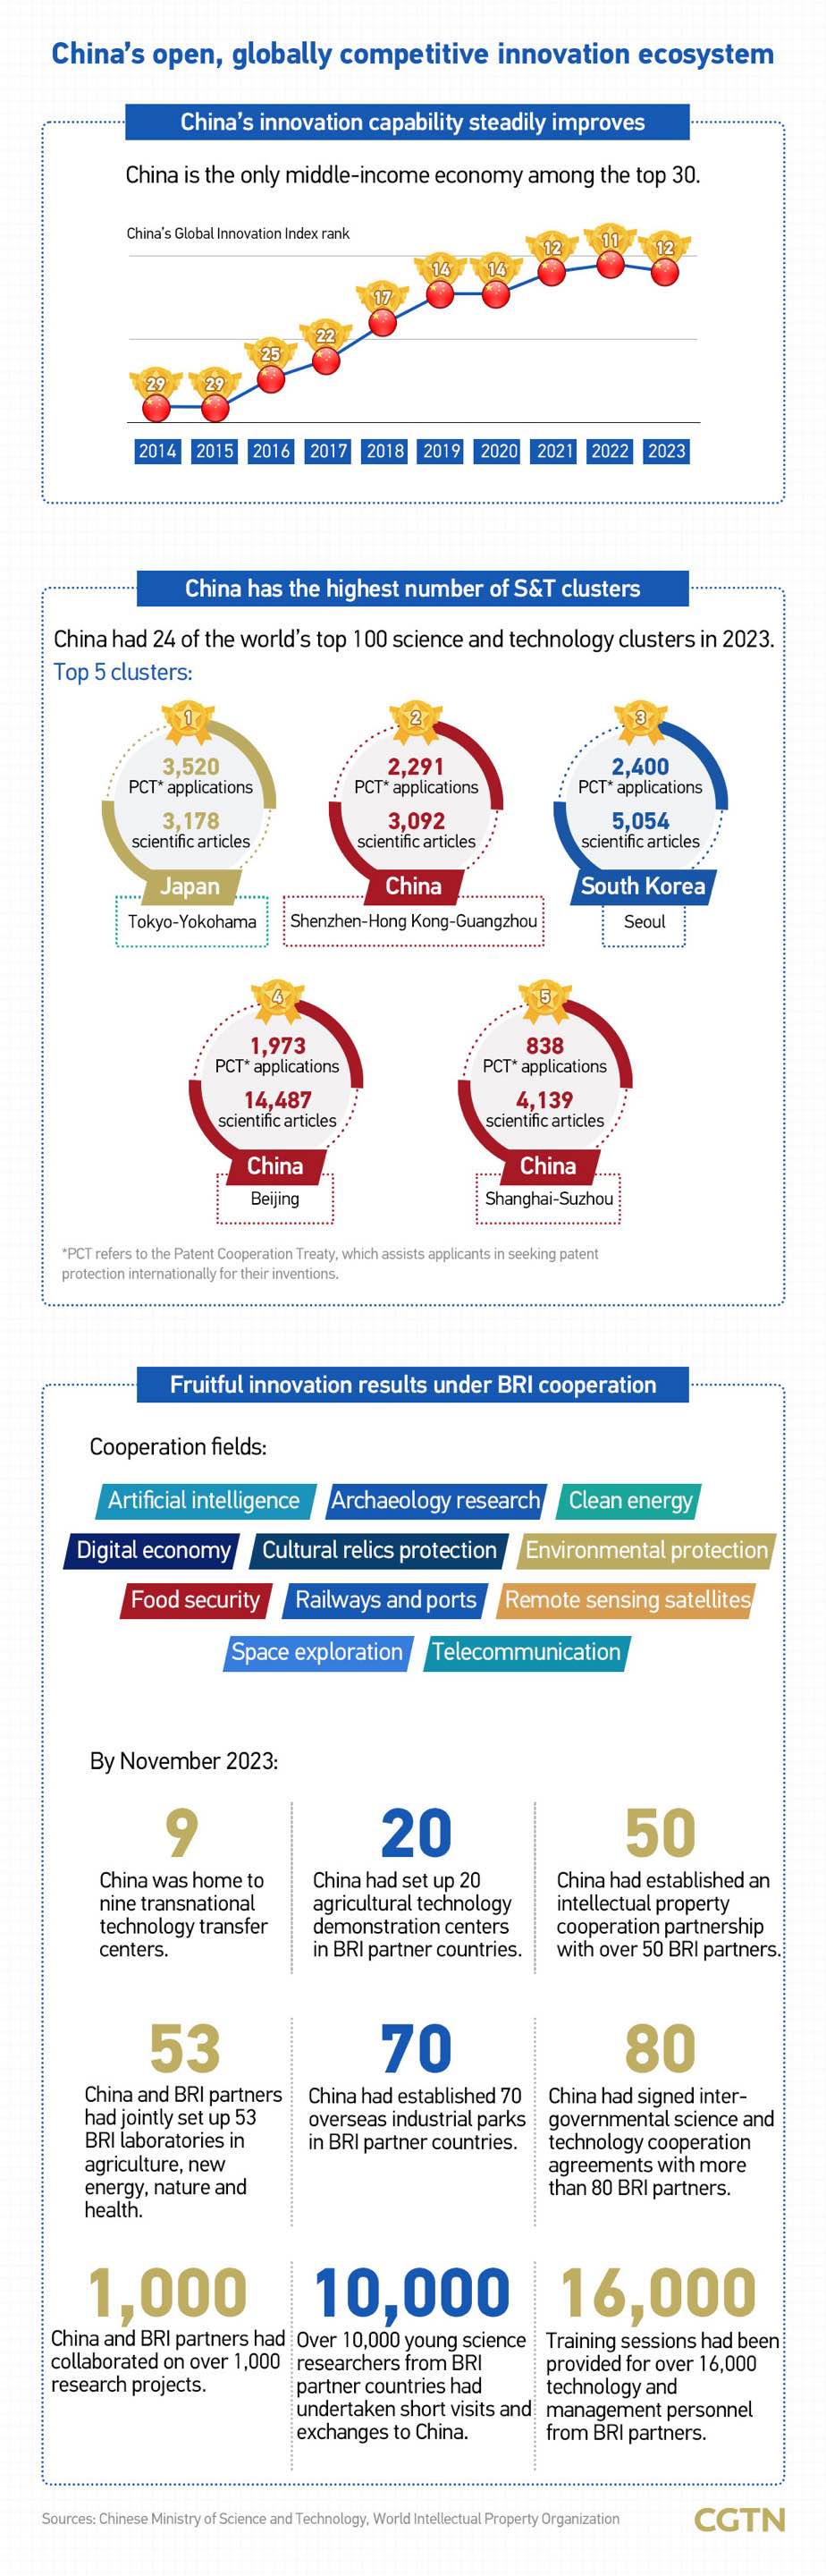 Graphics: China's open, globally competitive innovation ecosystem